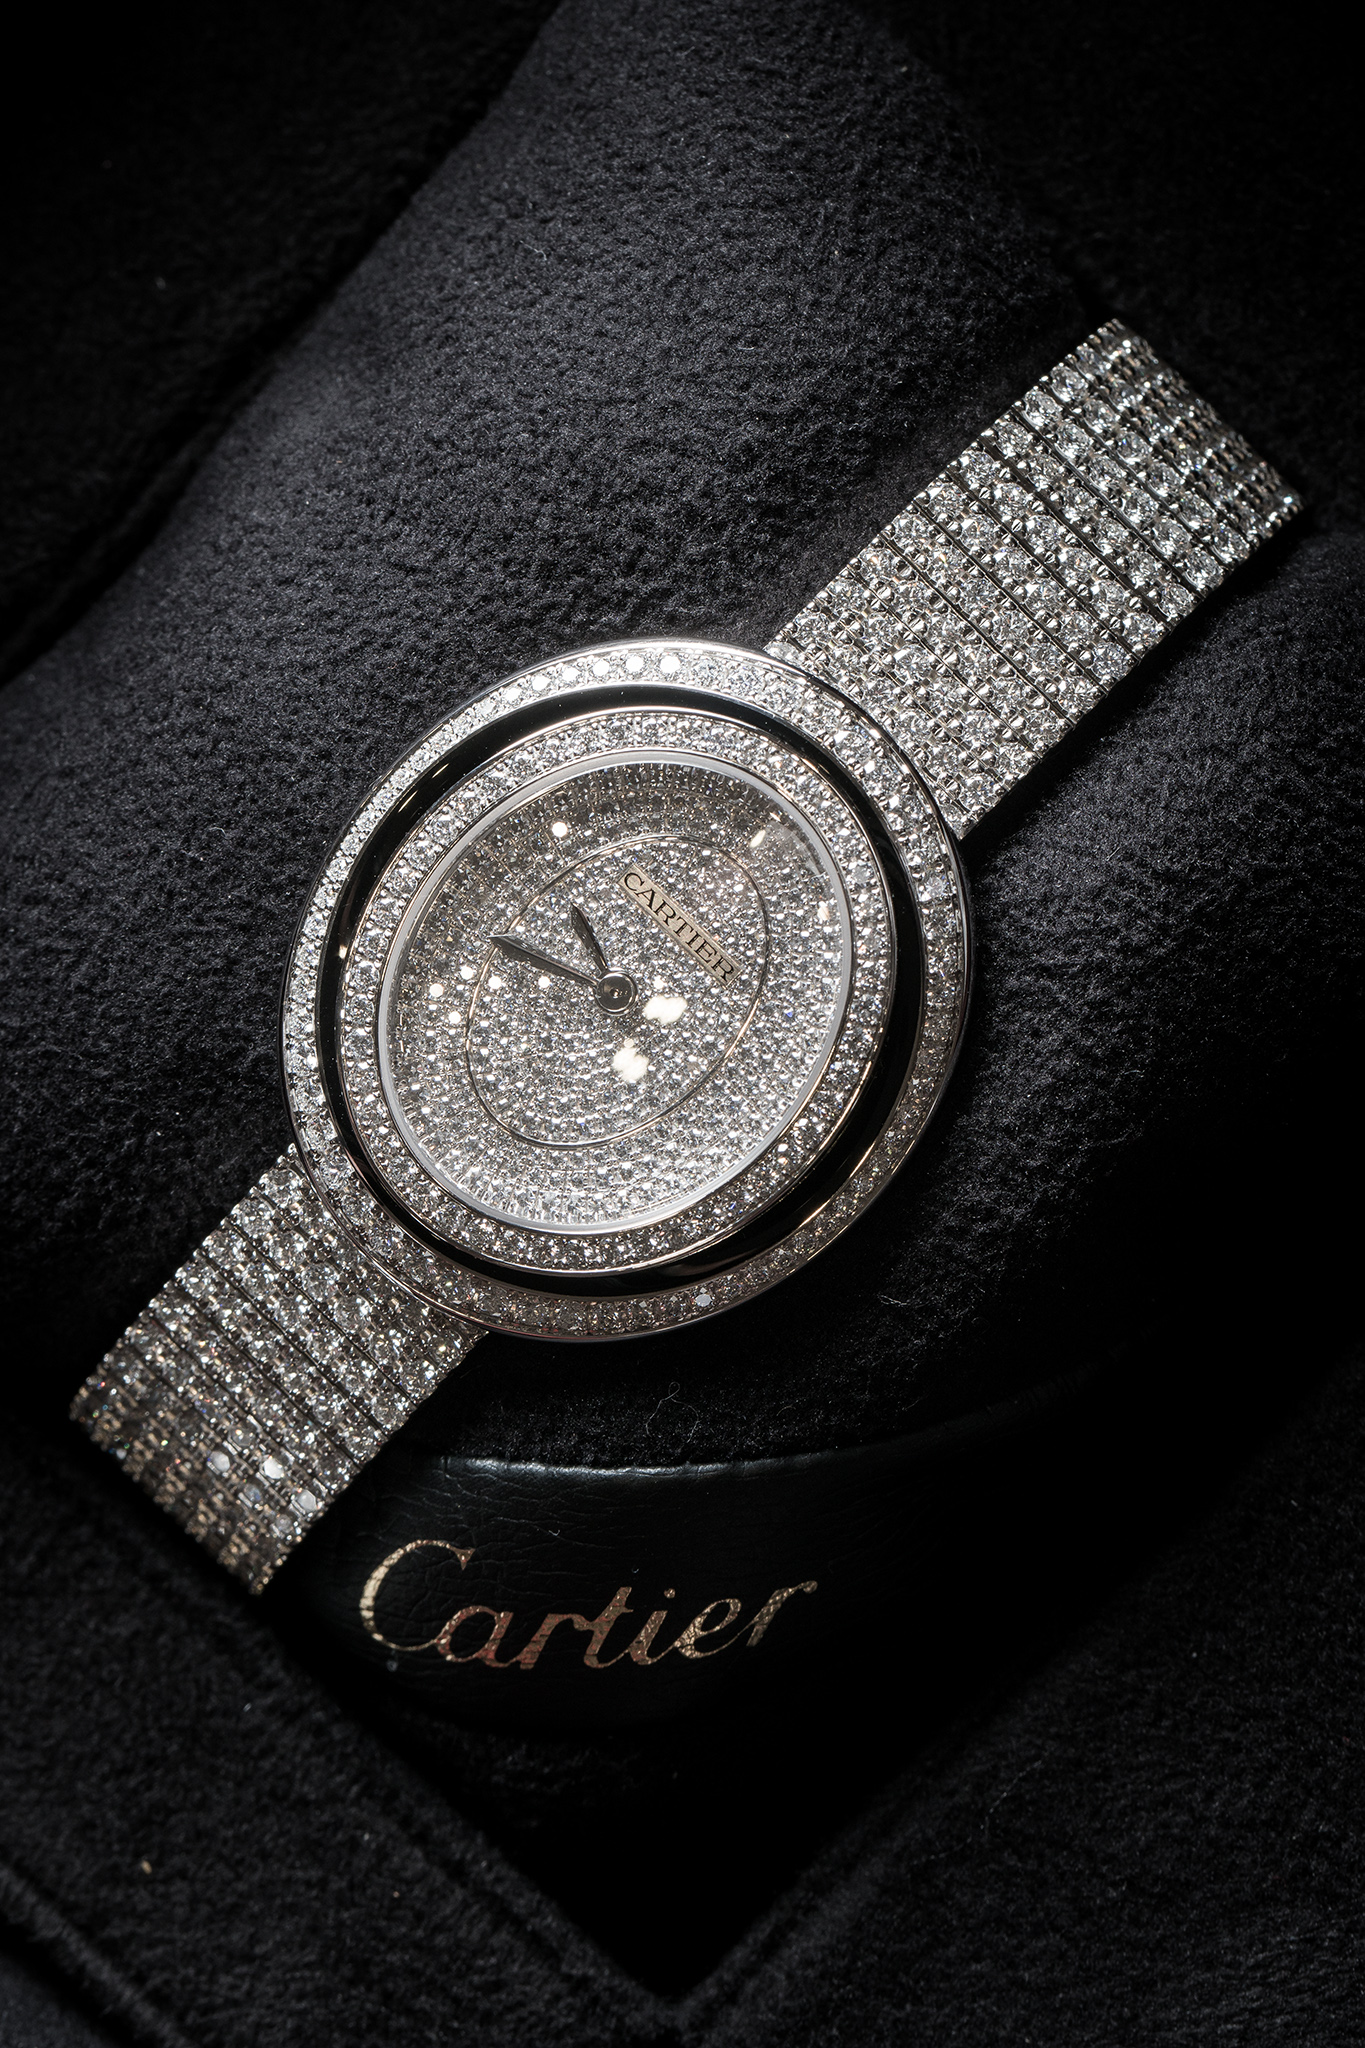 The eye-catching replica Cartier Hypnose HPI01049 watches are paved with diamonds.